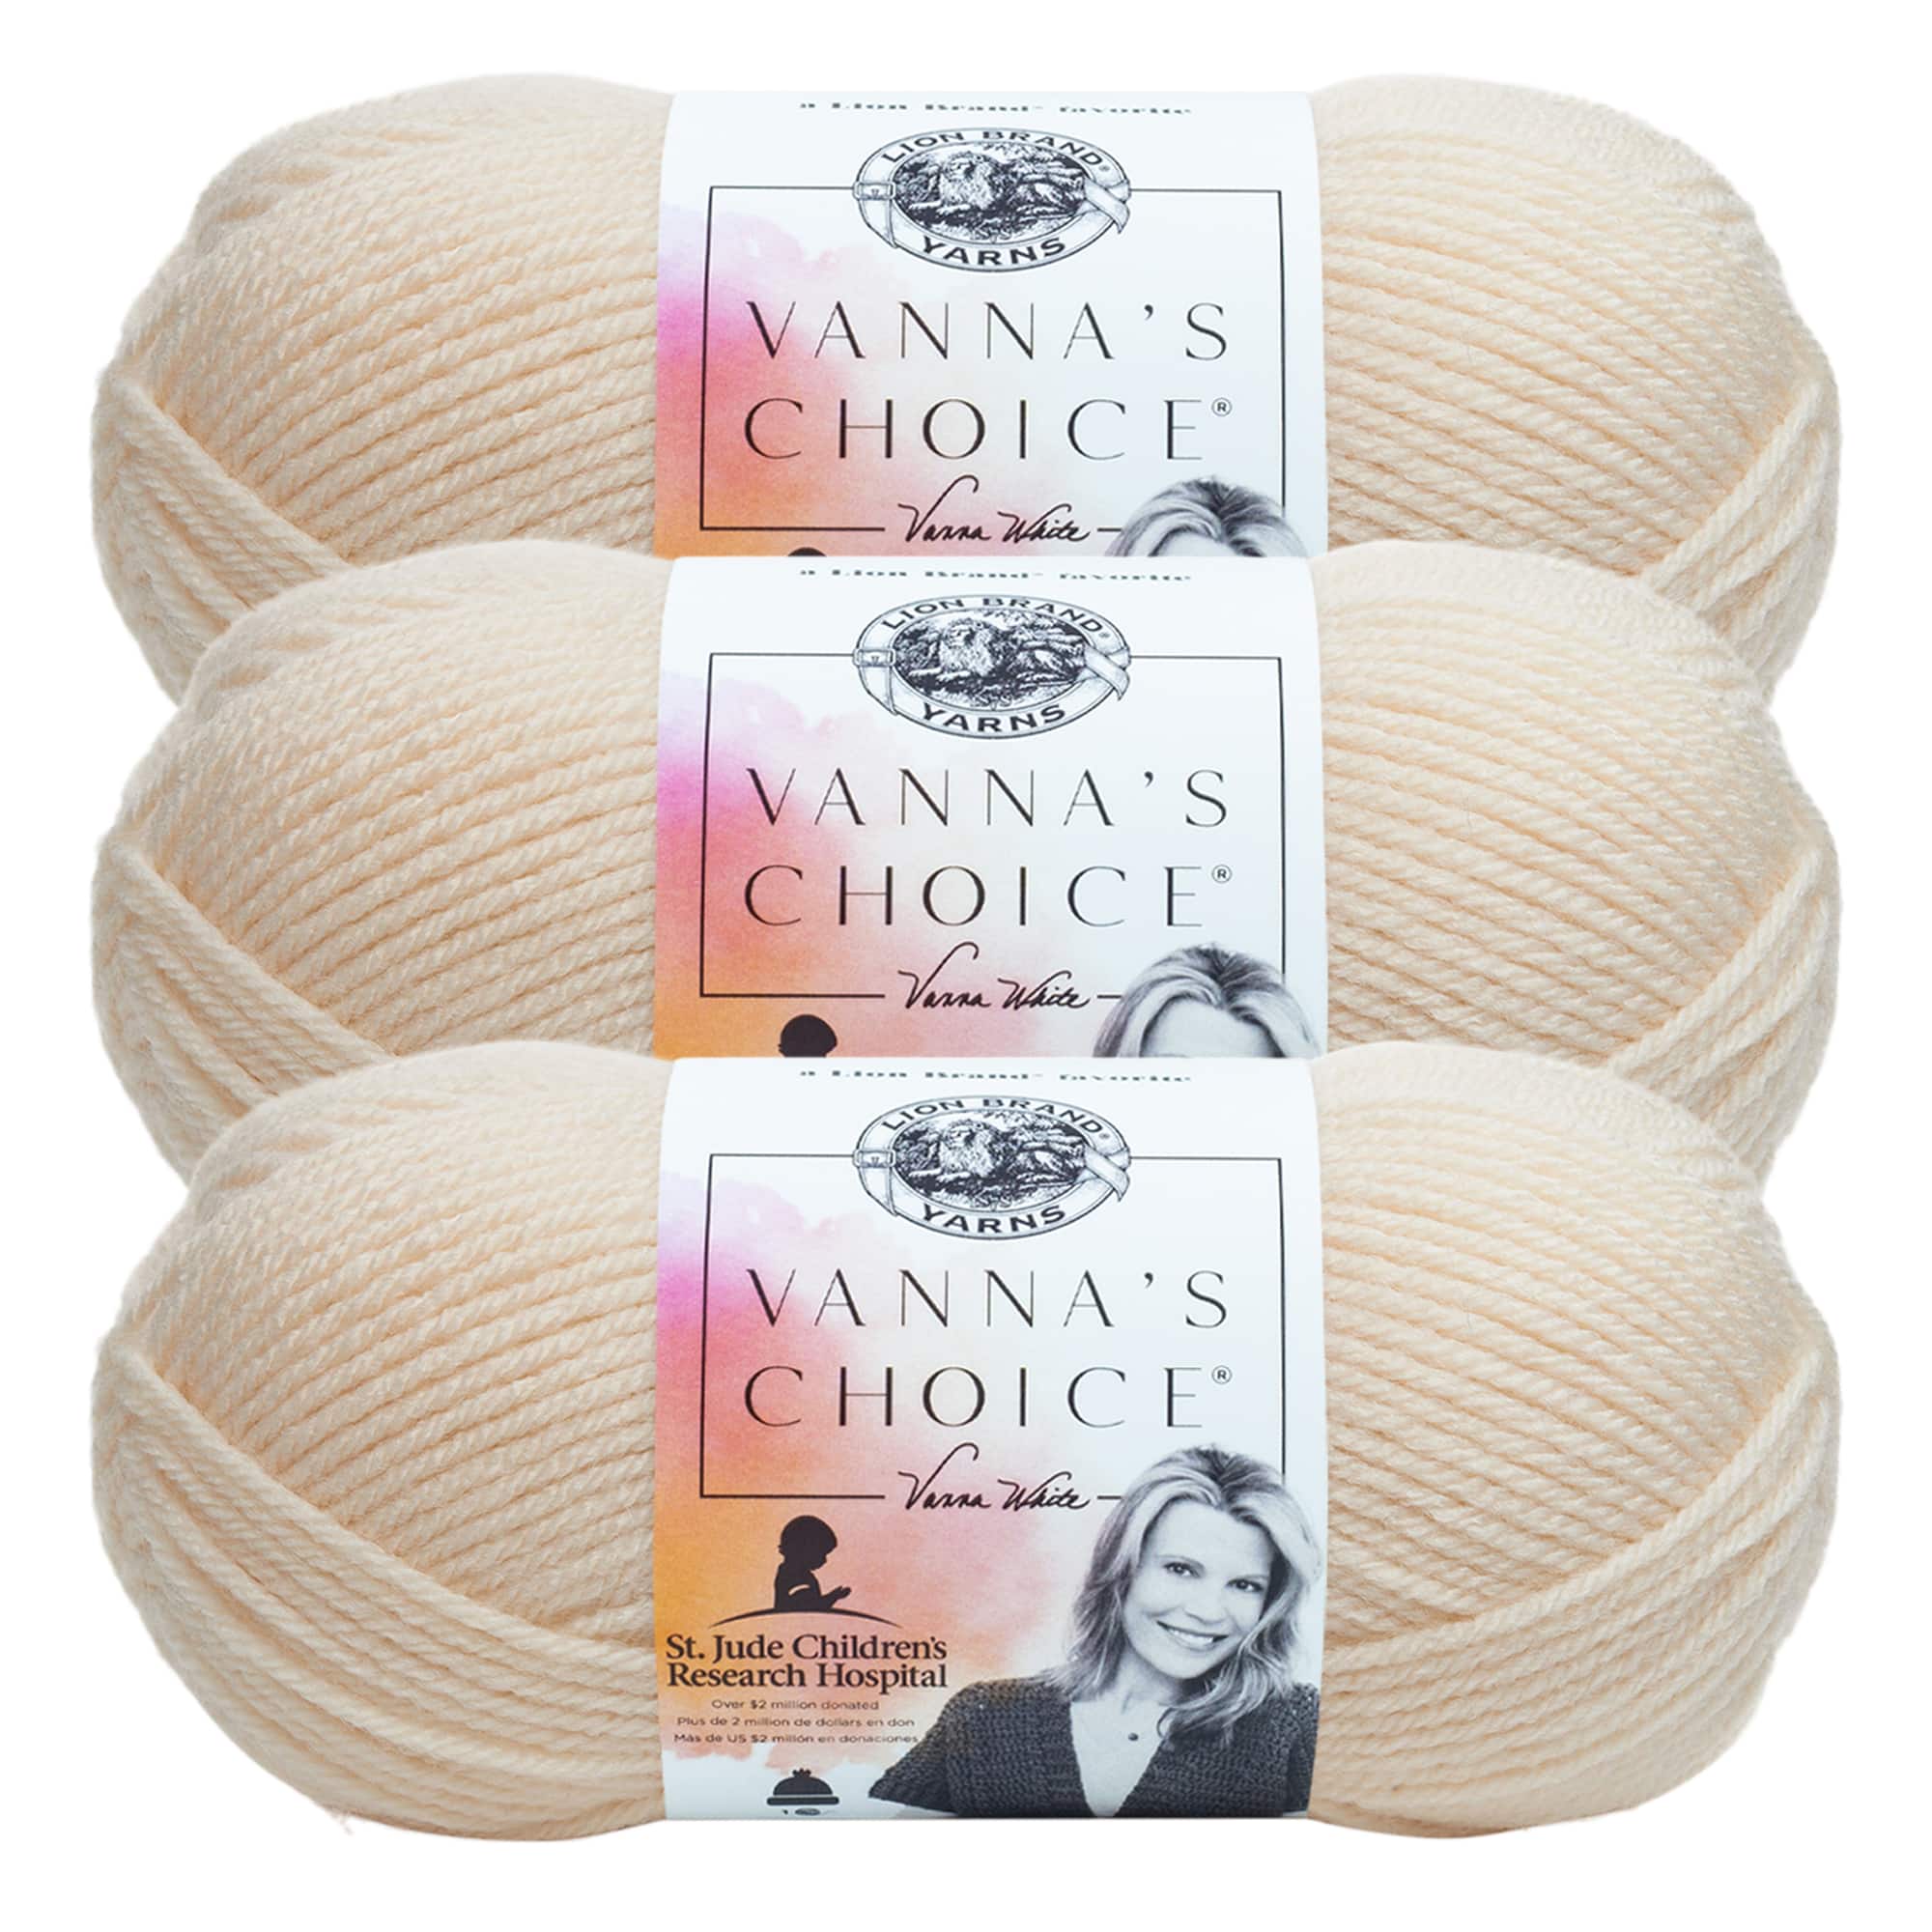 Lion Brand Baby Soft Yarn-Dusty Lilac - 6 Pack